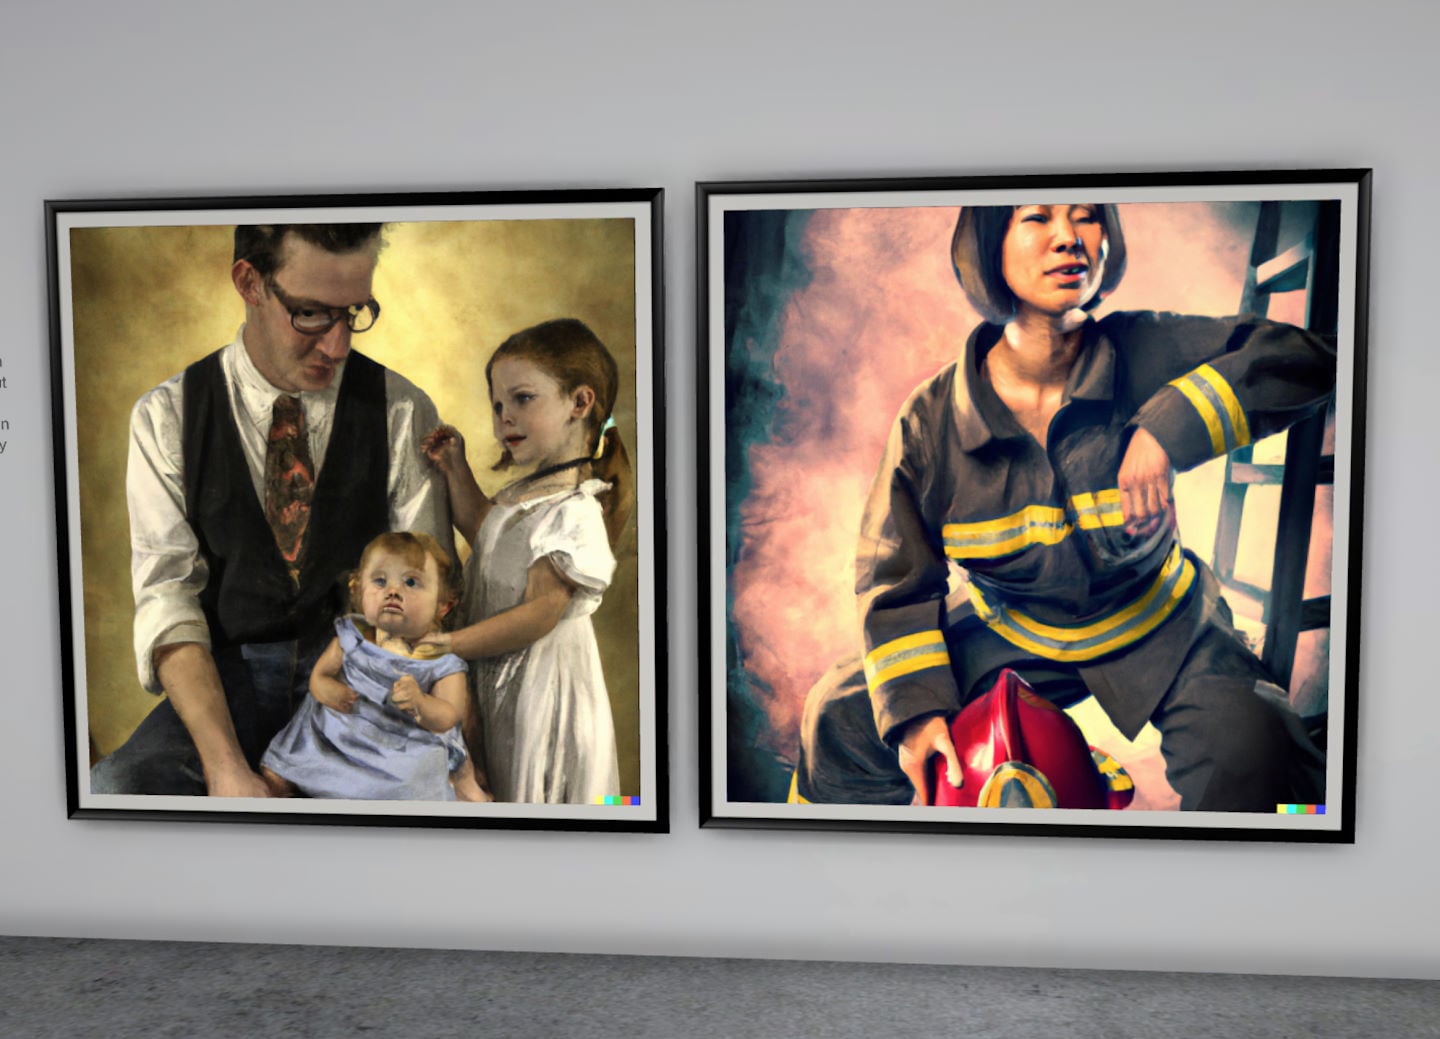 Two paintings are hung side by side on the wall; the first painting depicts a man dressed in a tie, waistcoat, and suit trousers taking care of two children. The second painting shows a woman in her firefighter outfit holding a helmet in her hands next to a ladder.